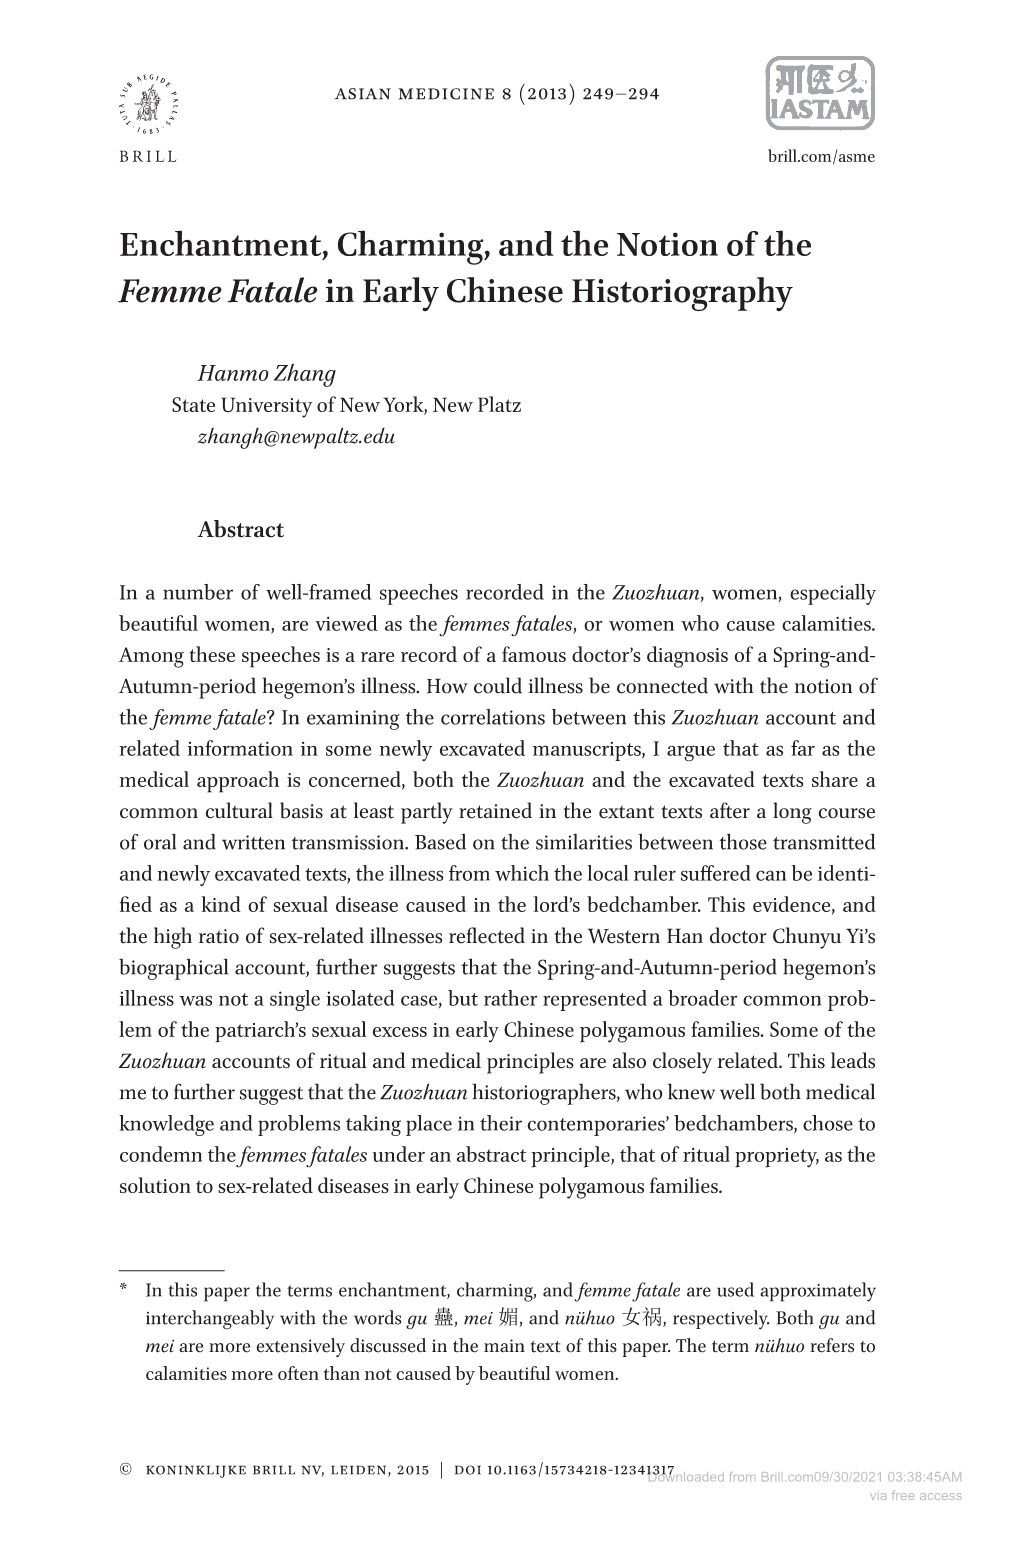 Enchantment, Charming, and the Notion of the Femme Fatale in Early Chinese Historiography